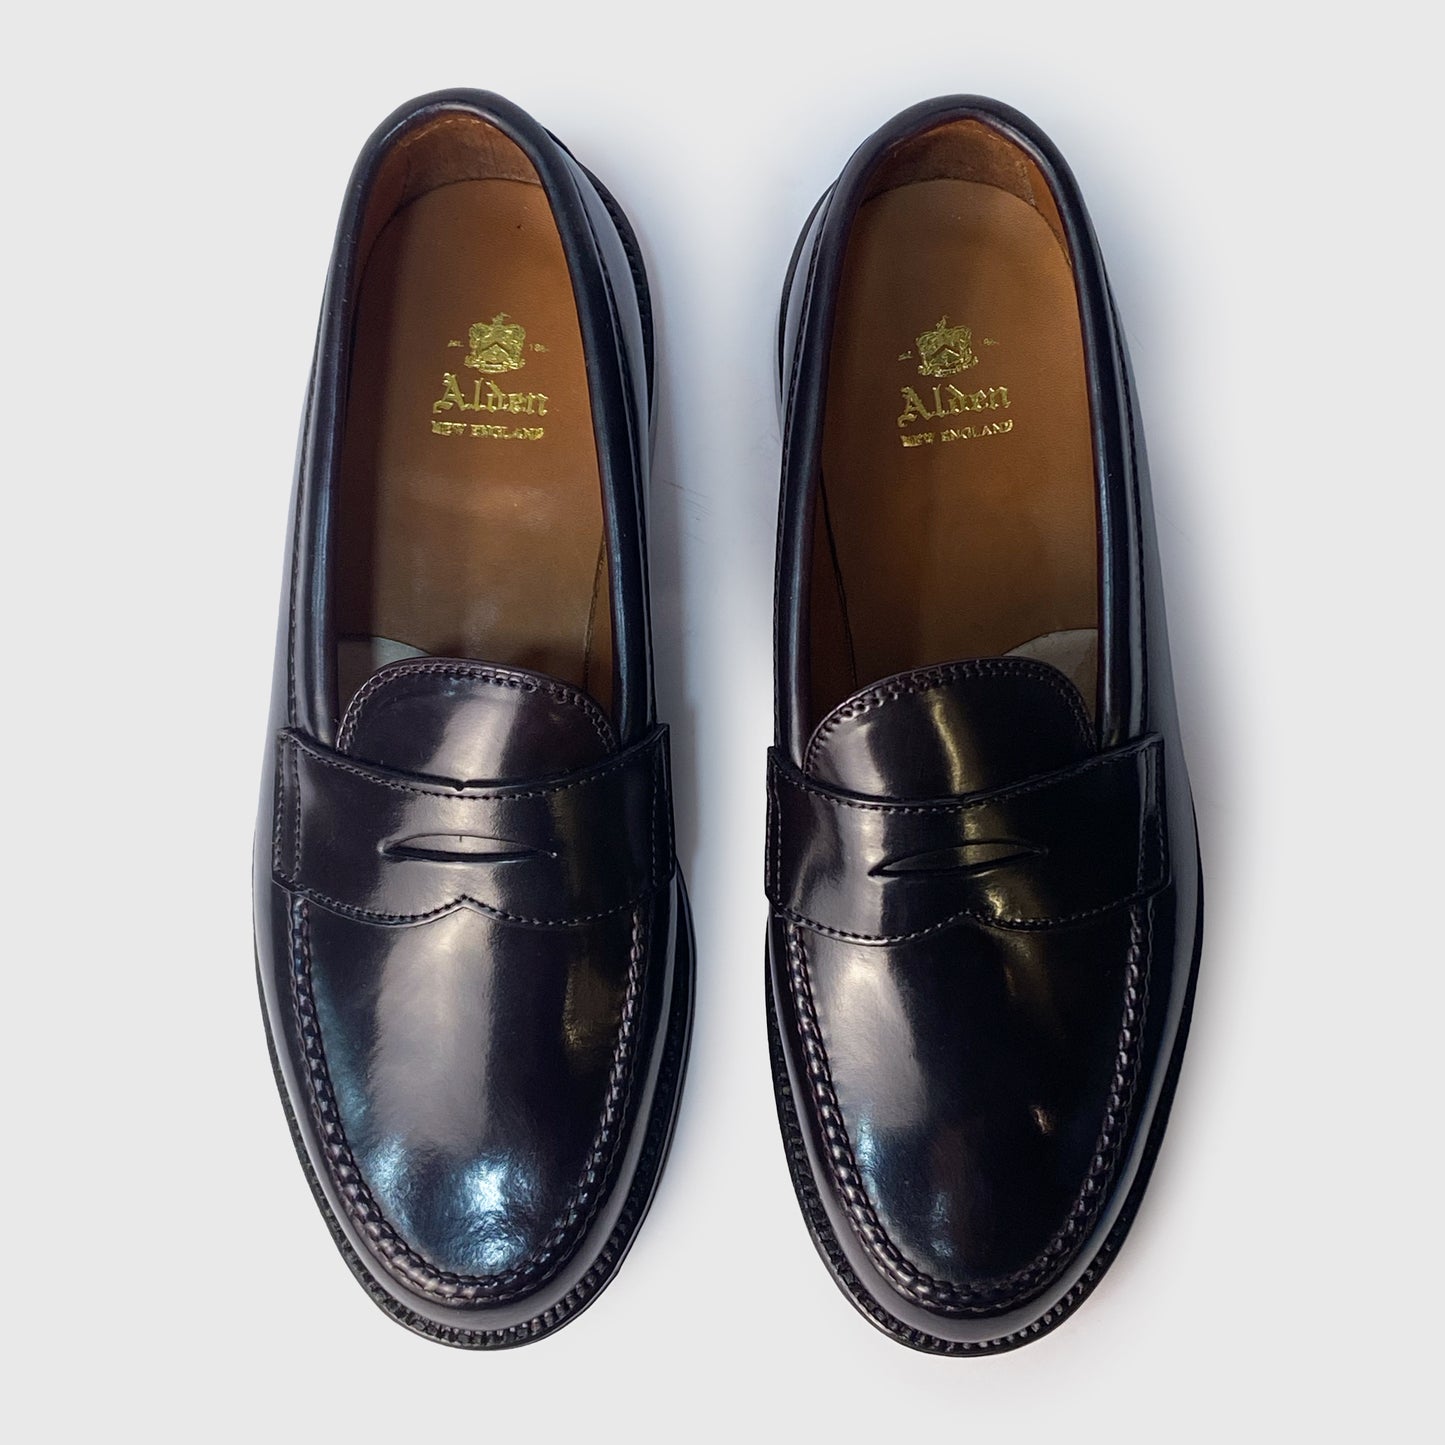 Leisure Handsewn Penny Loafer Color 8 Shell Cordovan 986